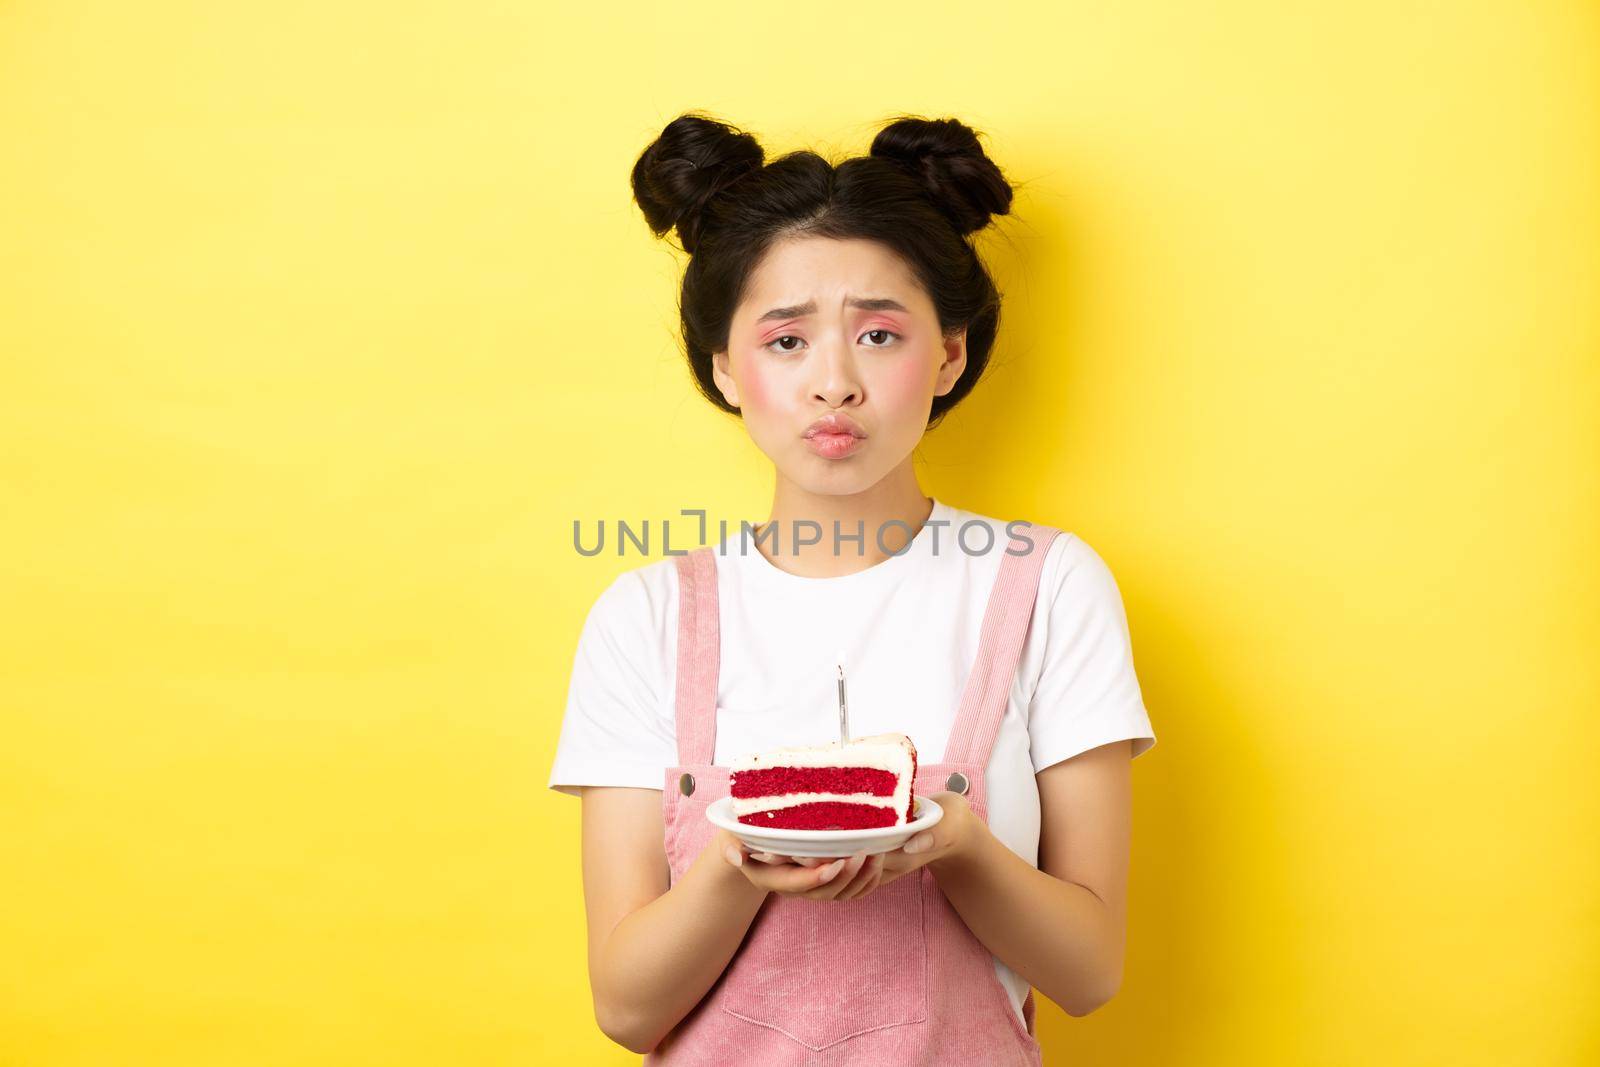 Sad and lonely birthday girl frowning upset, holding birthday cake with candle, making wish, standing on yellow background by Benzoix